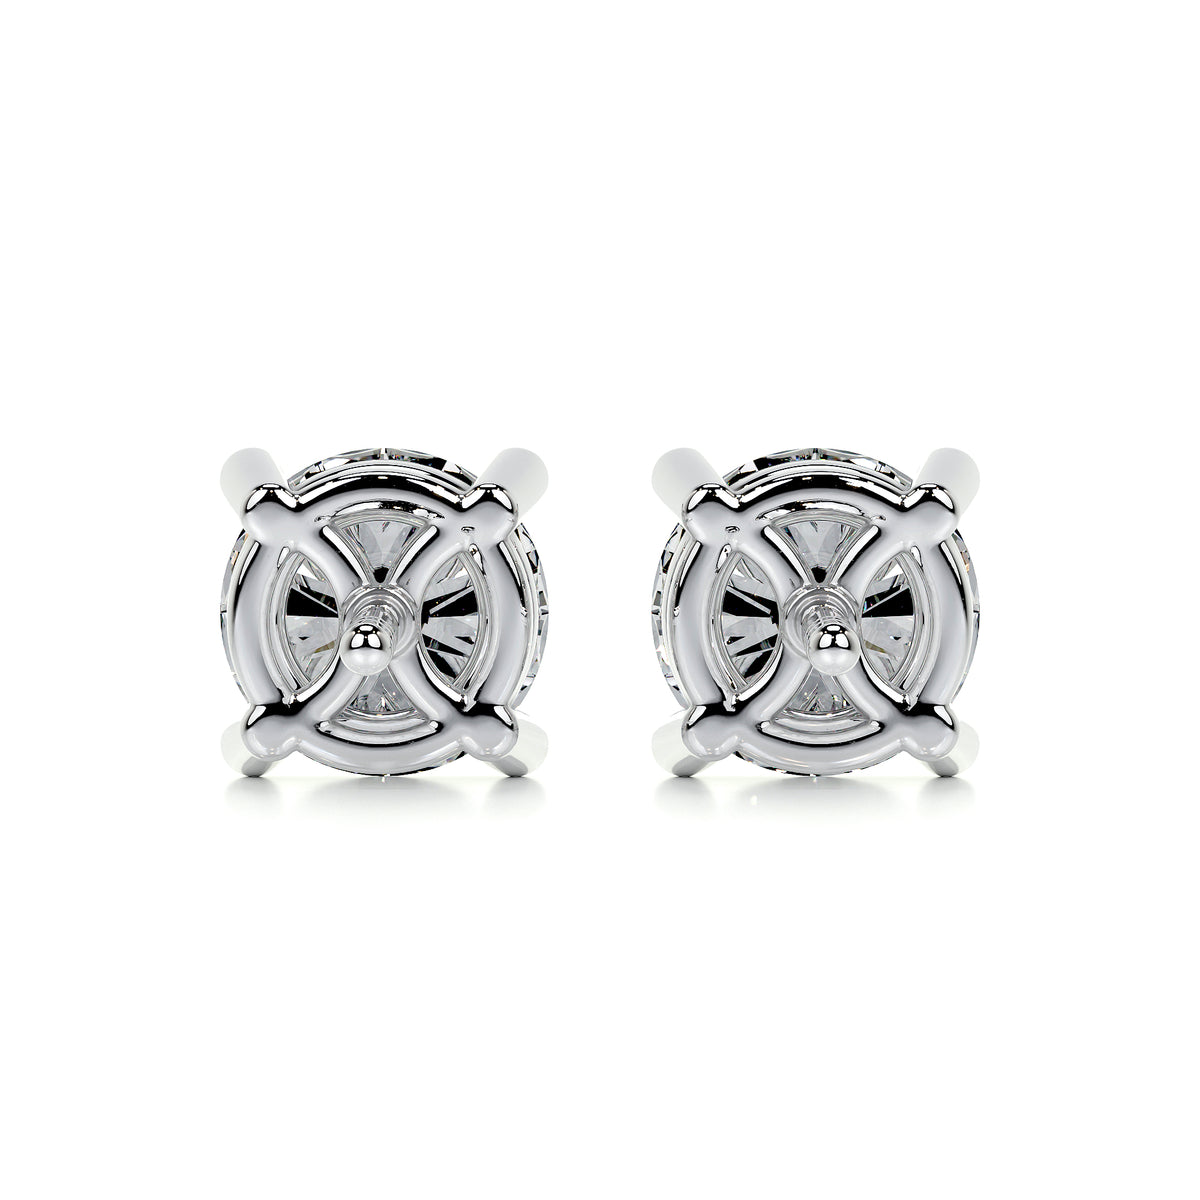 Classic Four Claw Stud Earrings